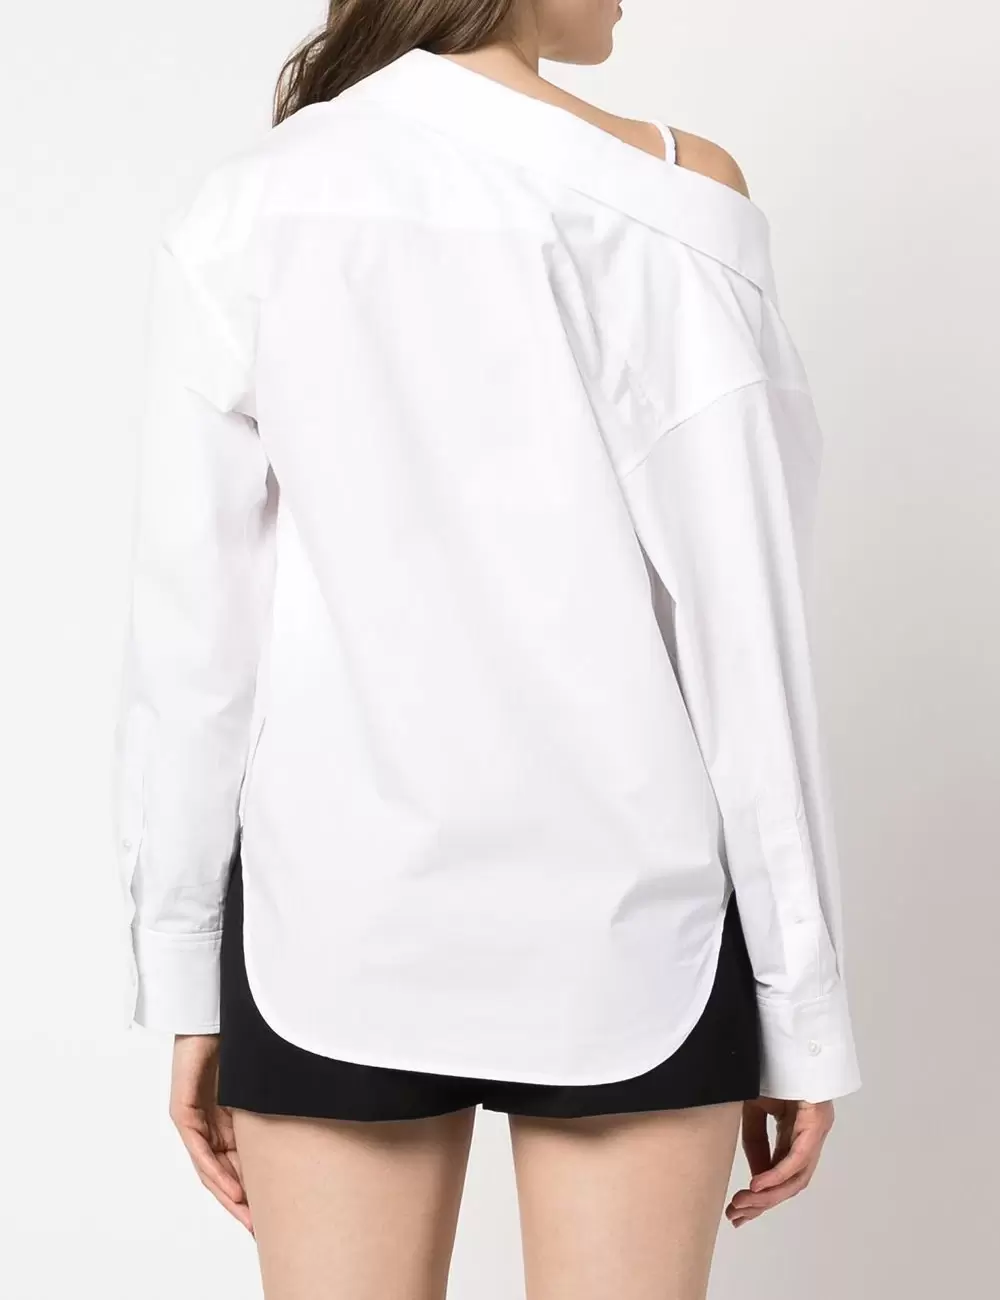 Alexander Wang Off-Shoulder Shirt in Compact Cotton Bright White